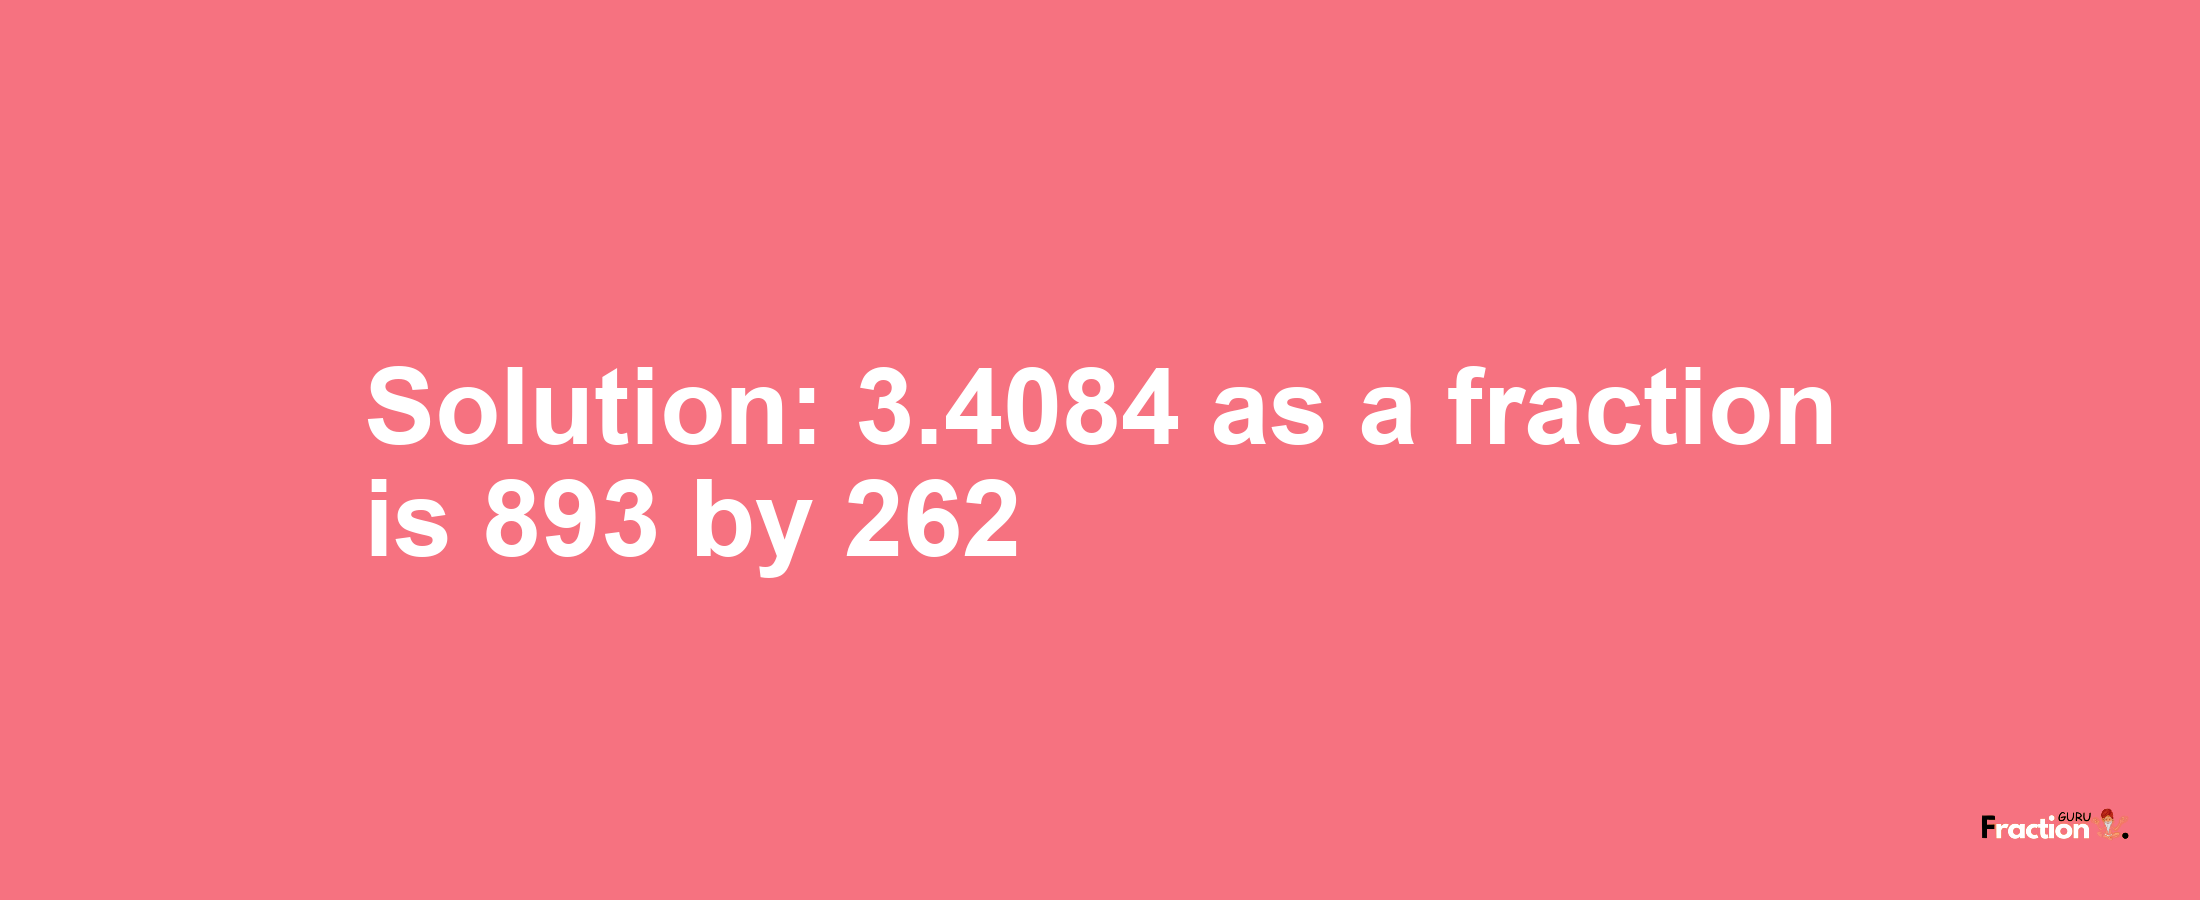 Solution:3.4084 as a fraction is 893/262